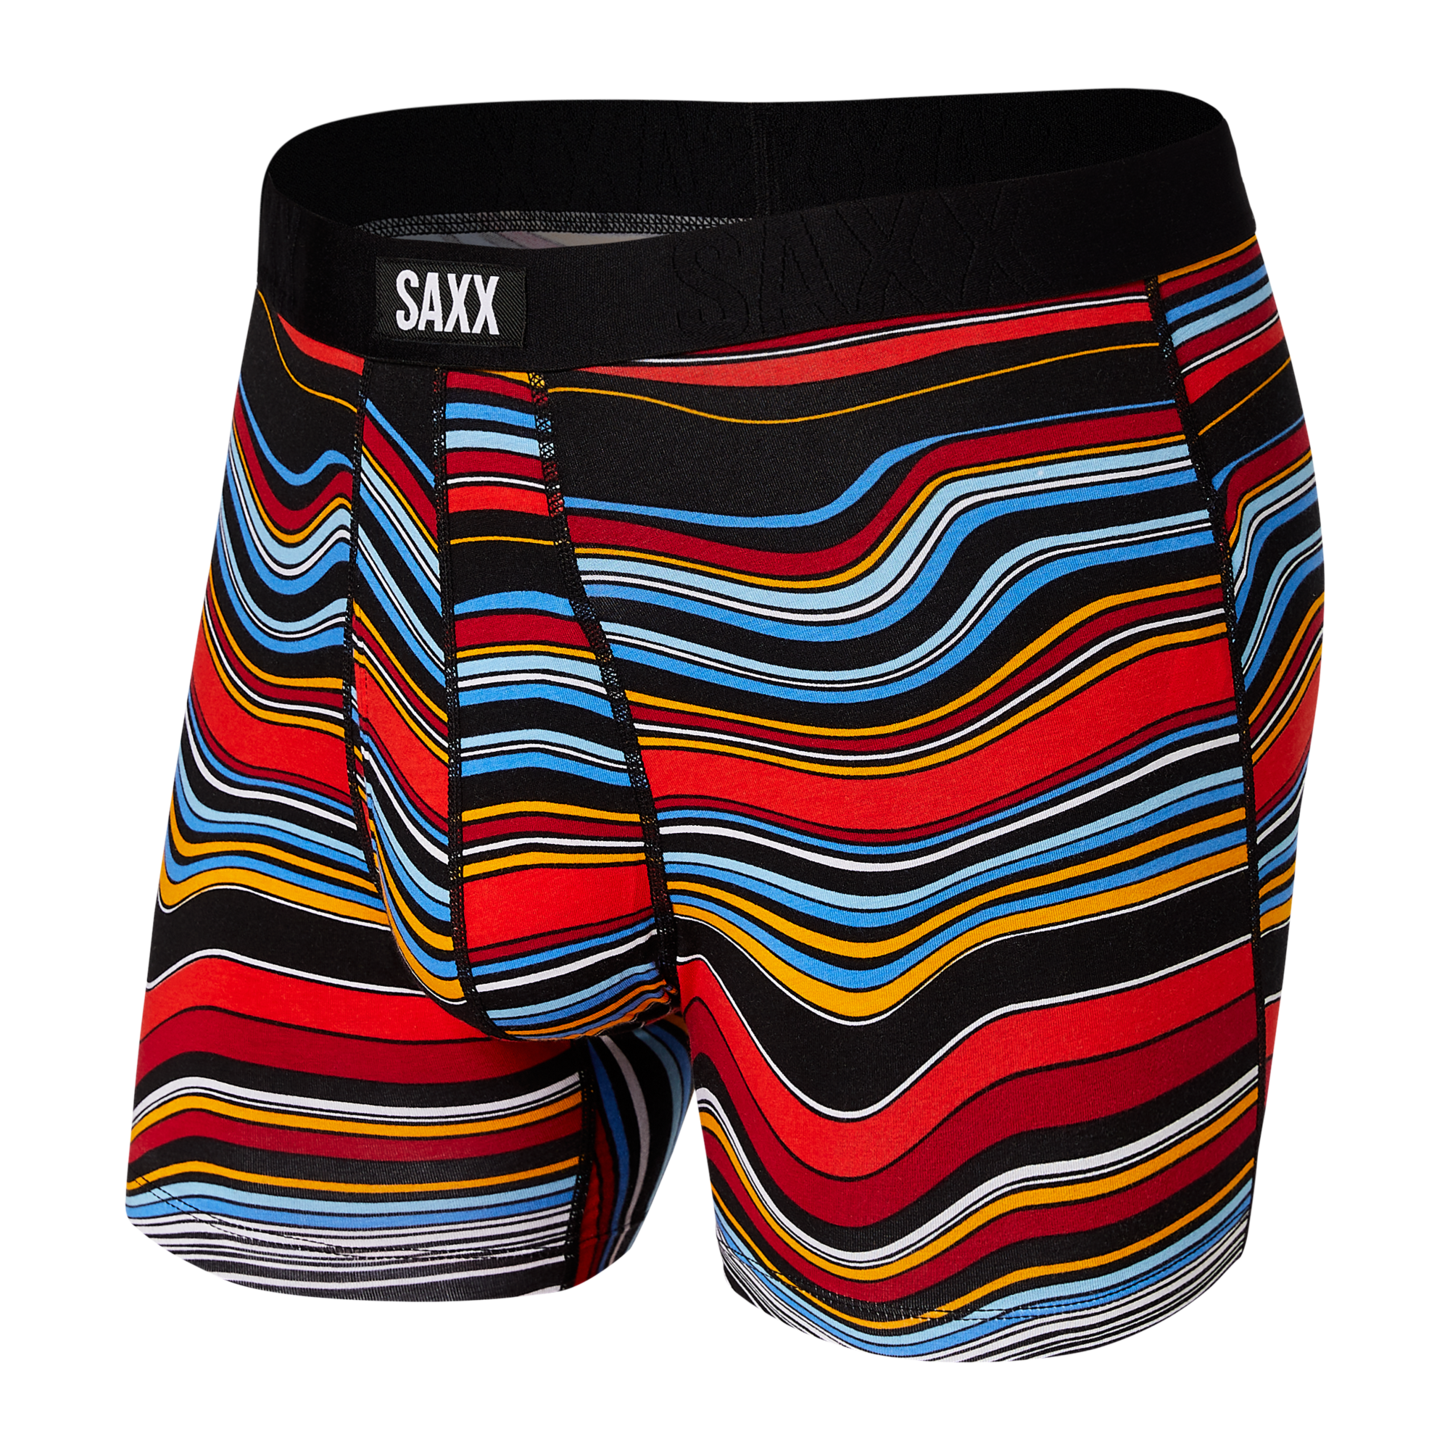 SAXX® Men's Undercover Boxer Brief with Fly